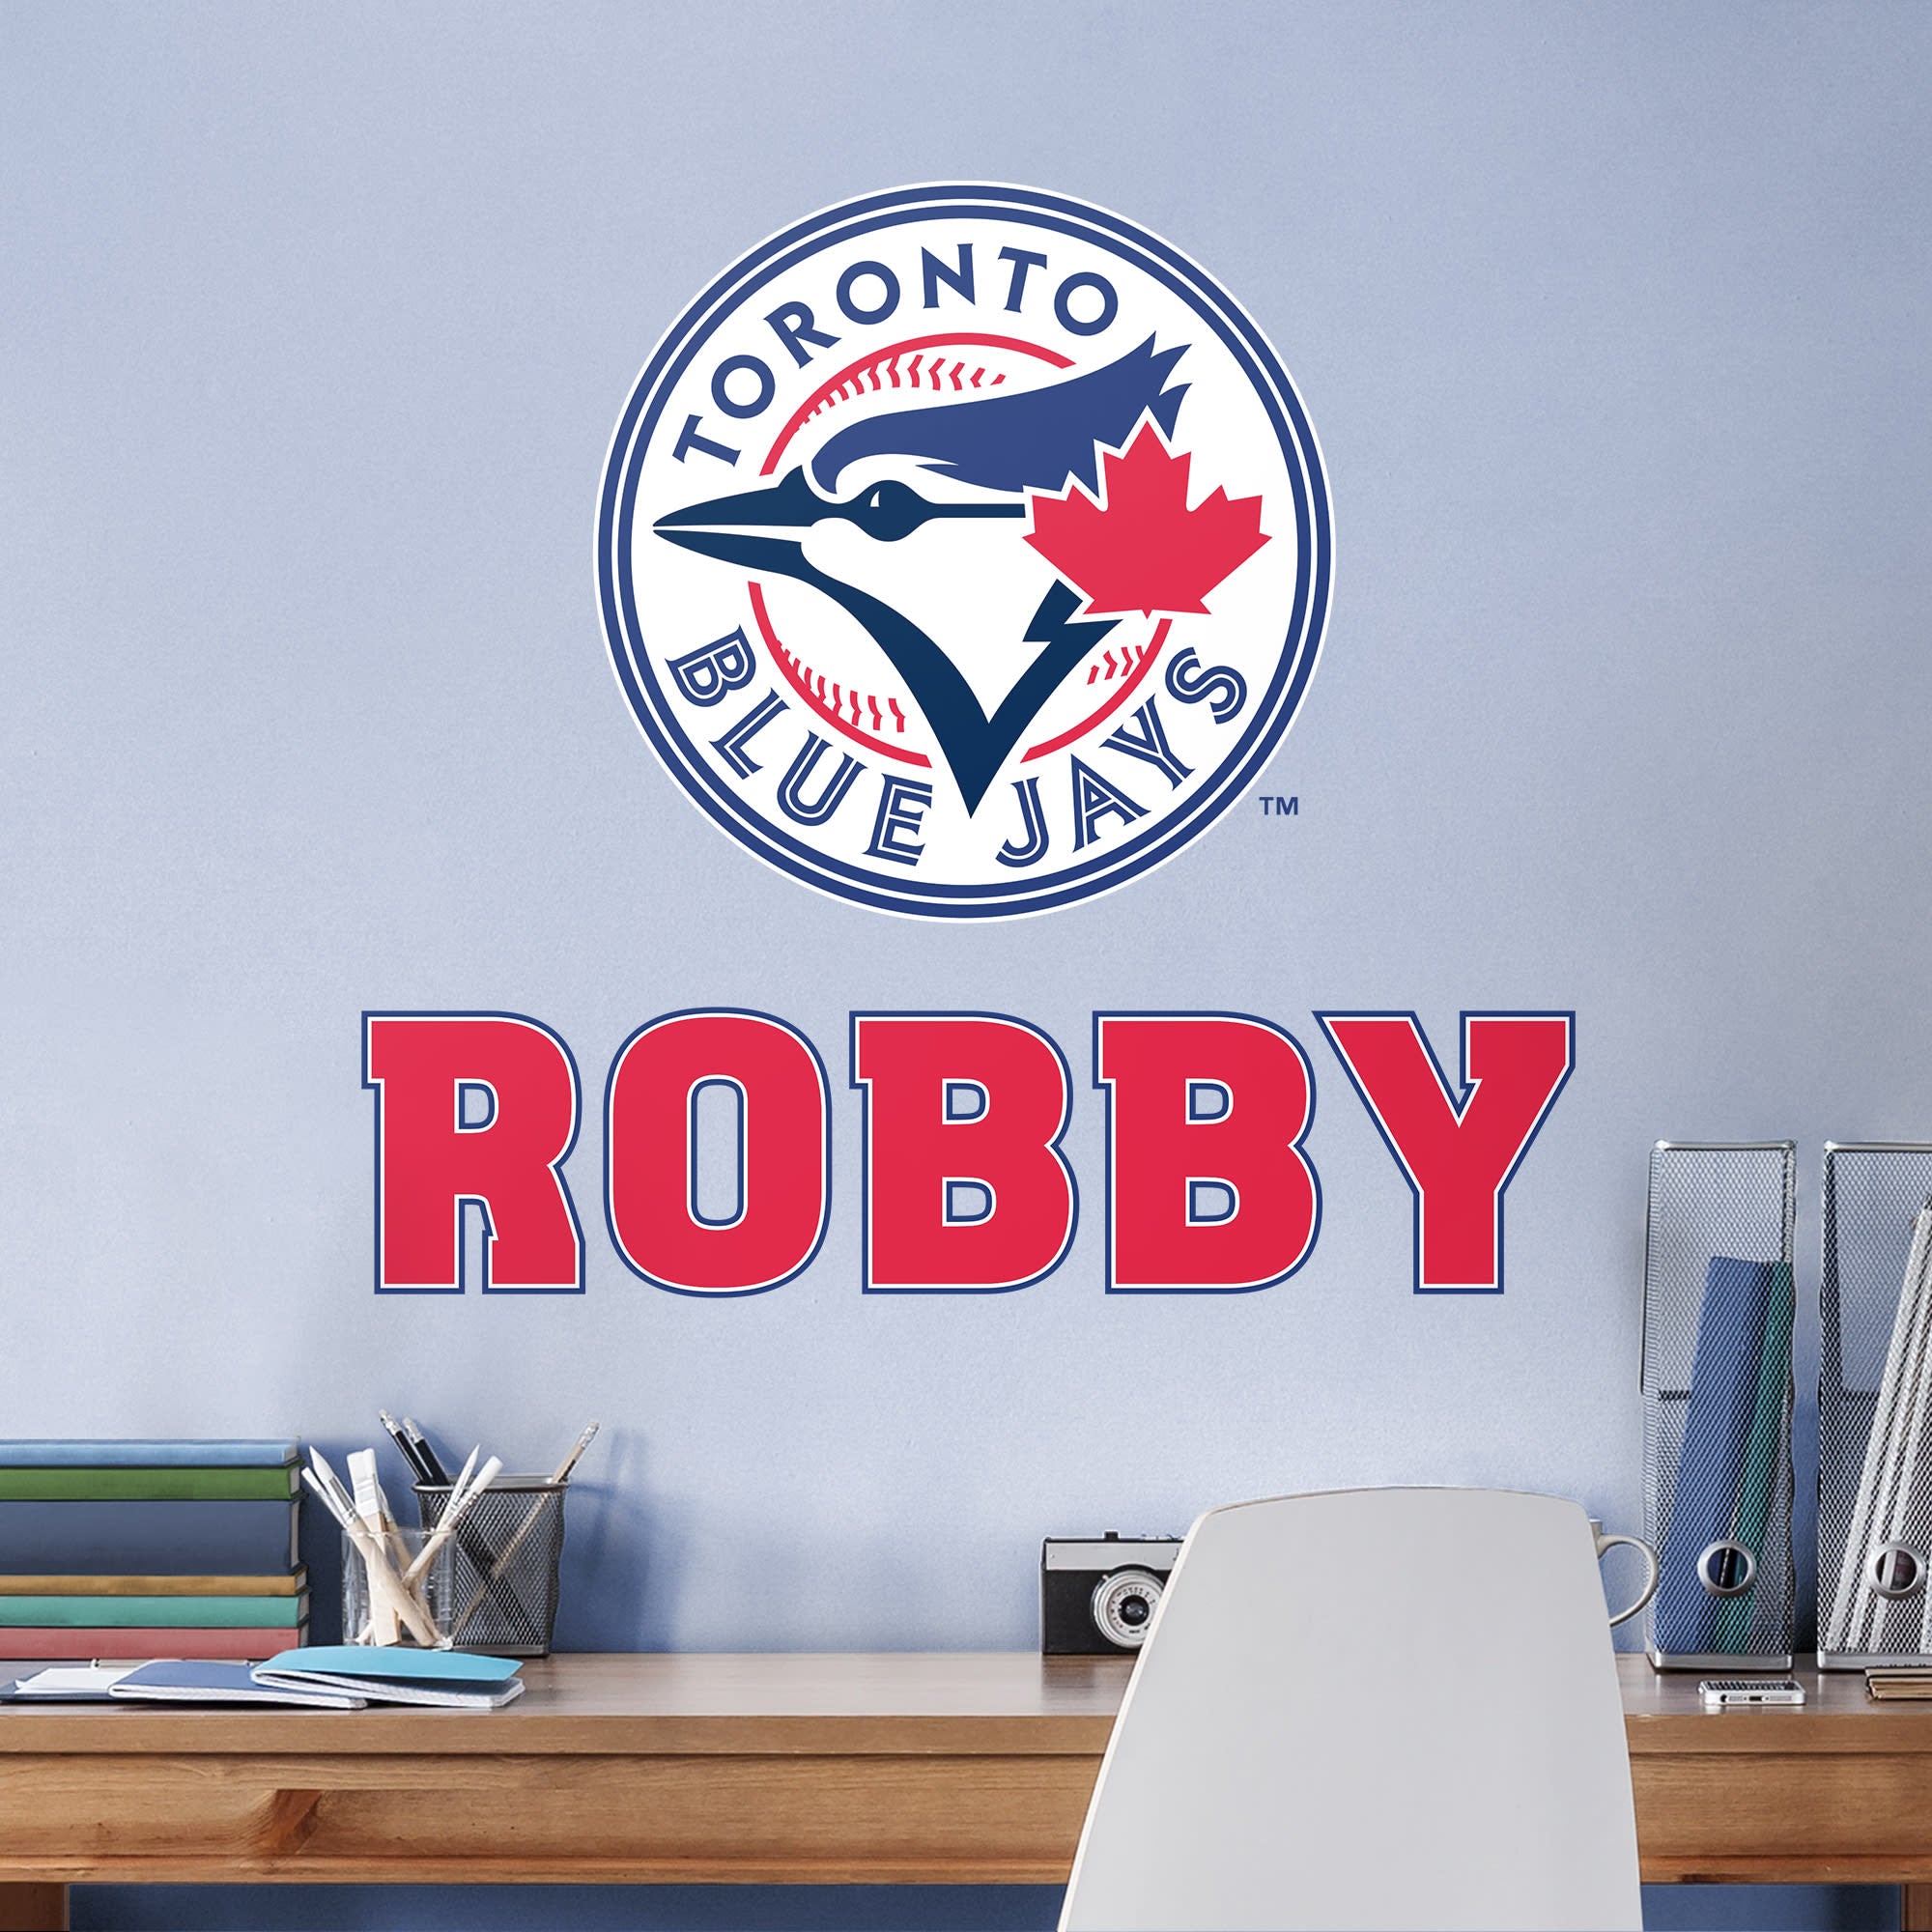 Toronto Blue Jays: Stacked Personalized Name - Officially Licensed MLB Transfer Decal in Red (52"W x 39.5"H) by Fathead | Vinyl